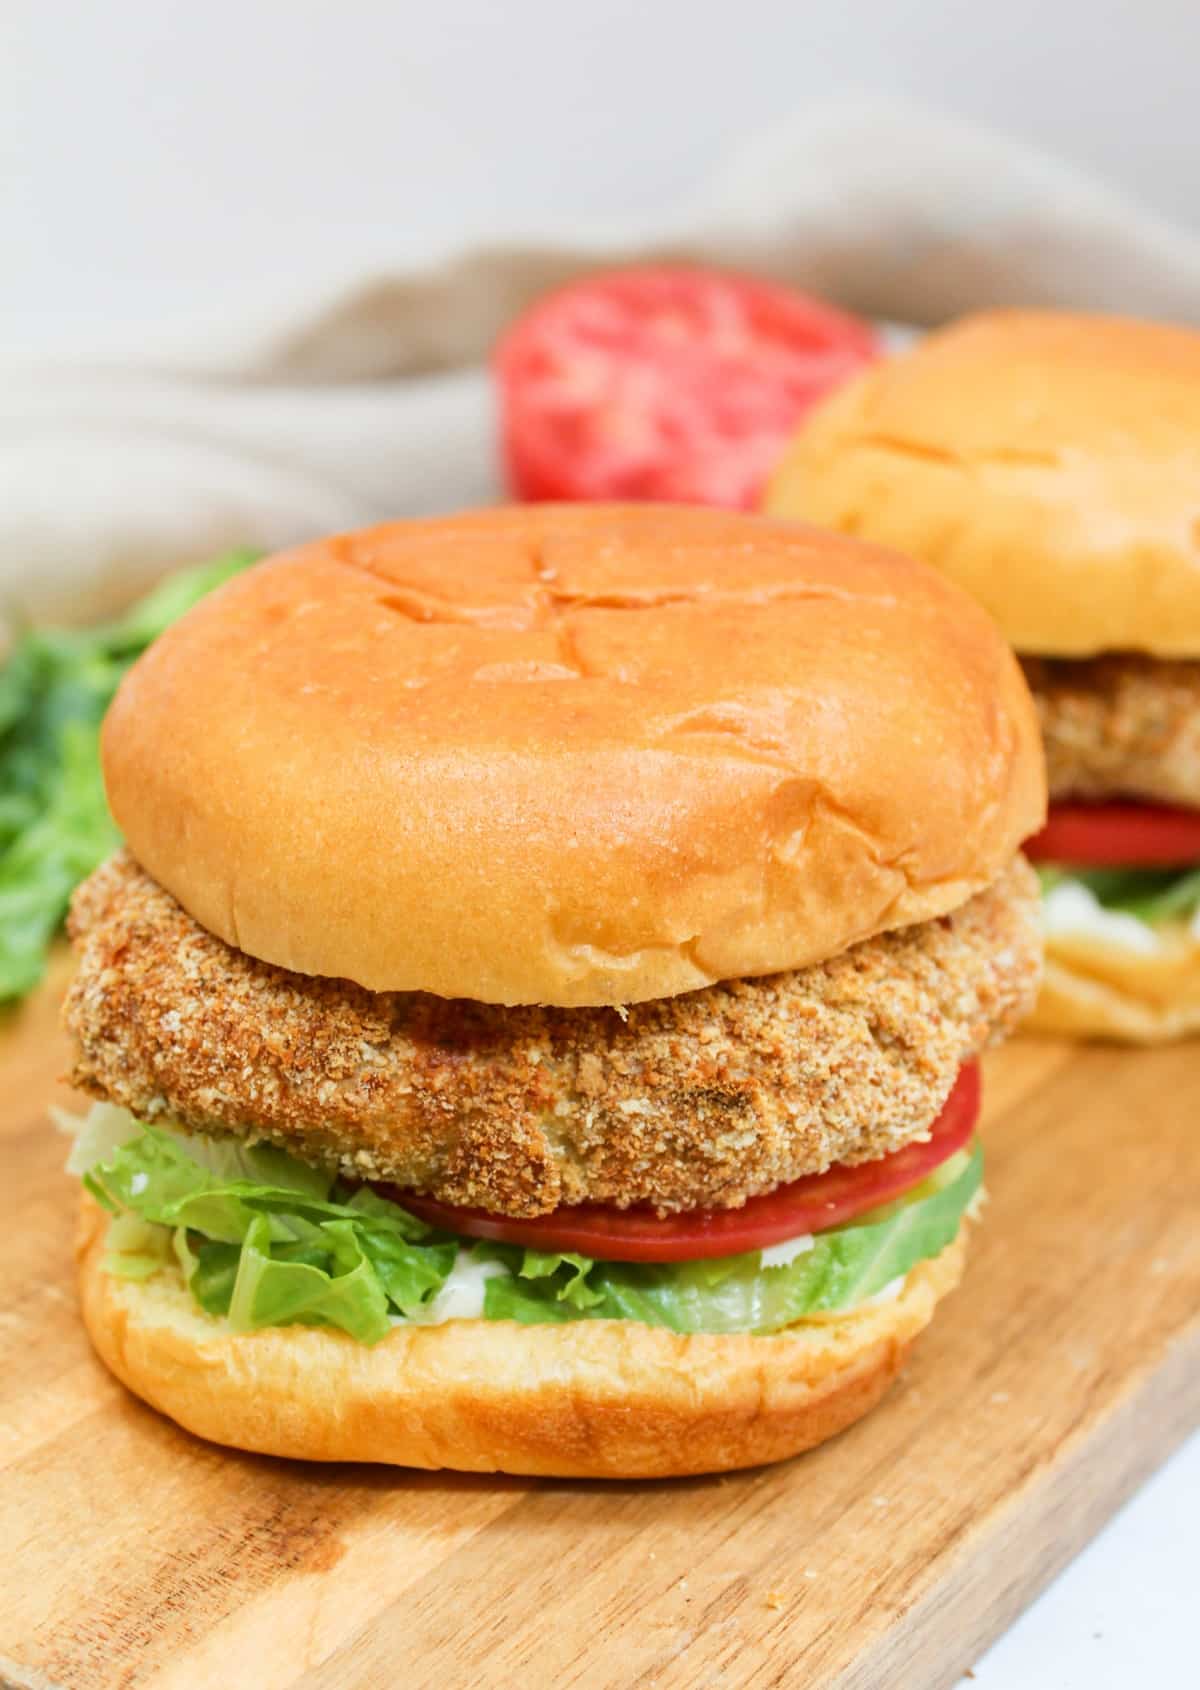 crispy chicken patty on a bun with shredded lettuce and sliced tomato.